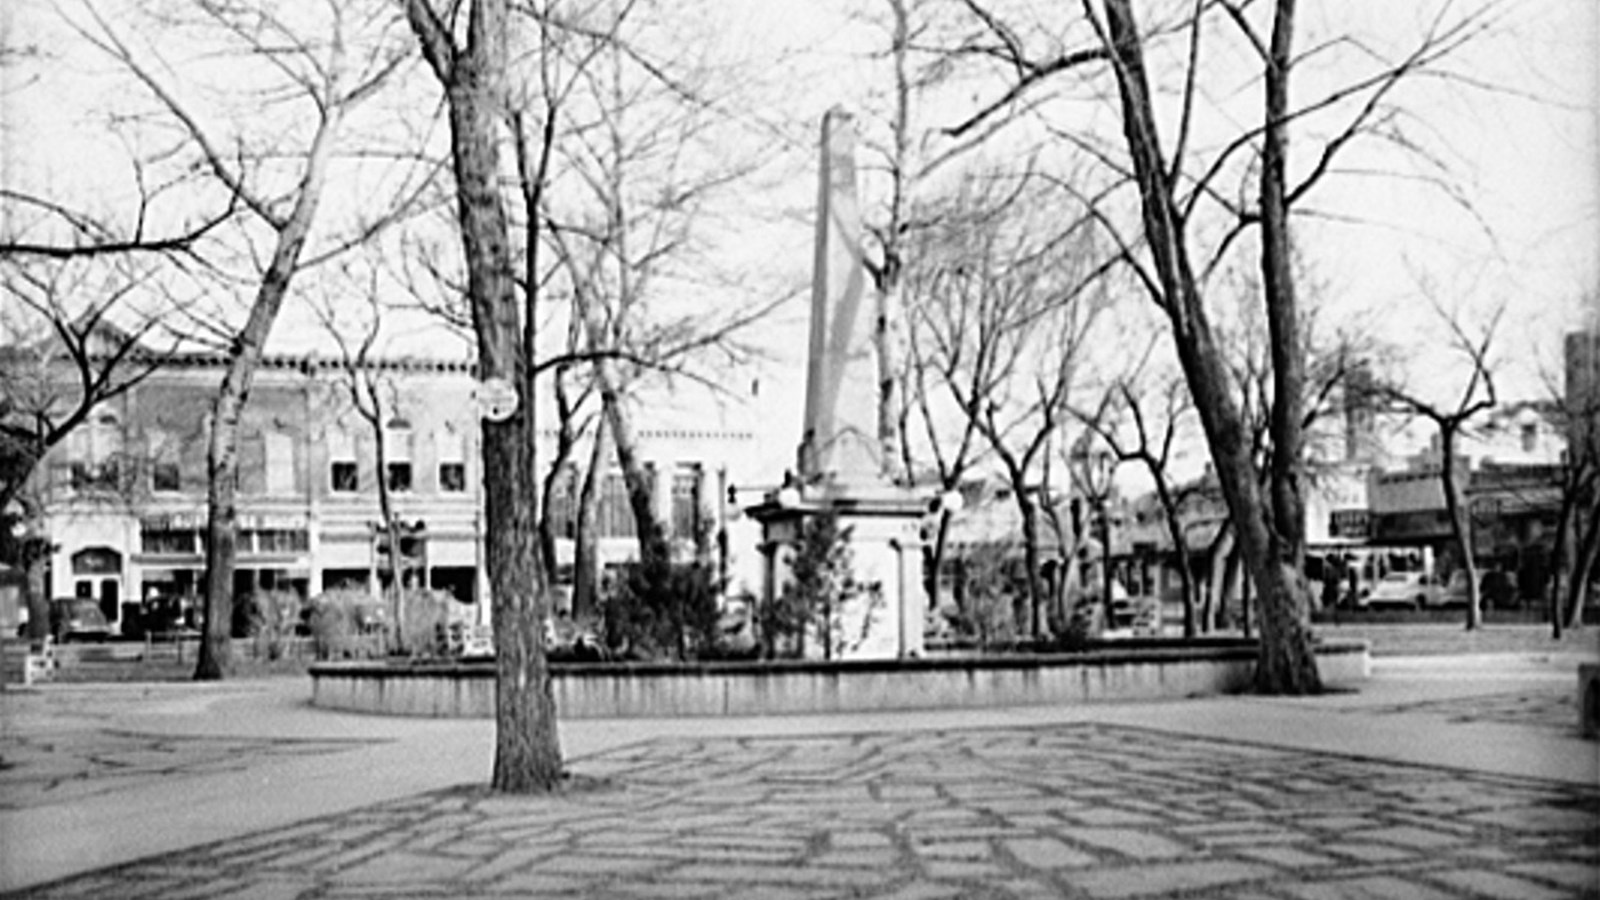 Photo of Santa Fe Plaza, with an obelisk monument in the center, surrounded by buildings. LOC photo